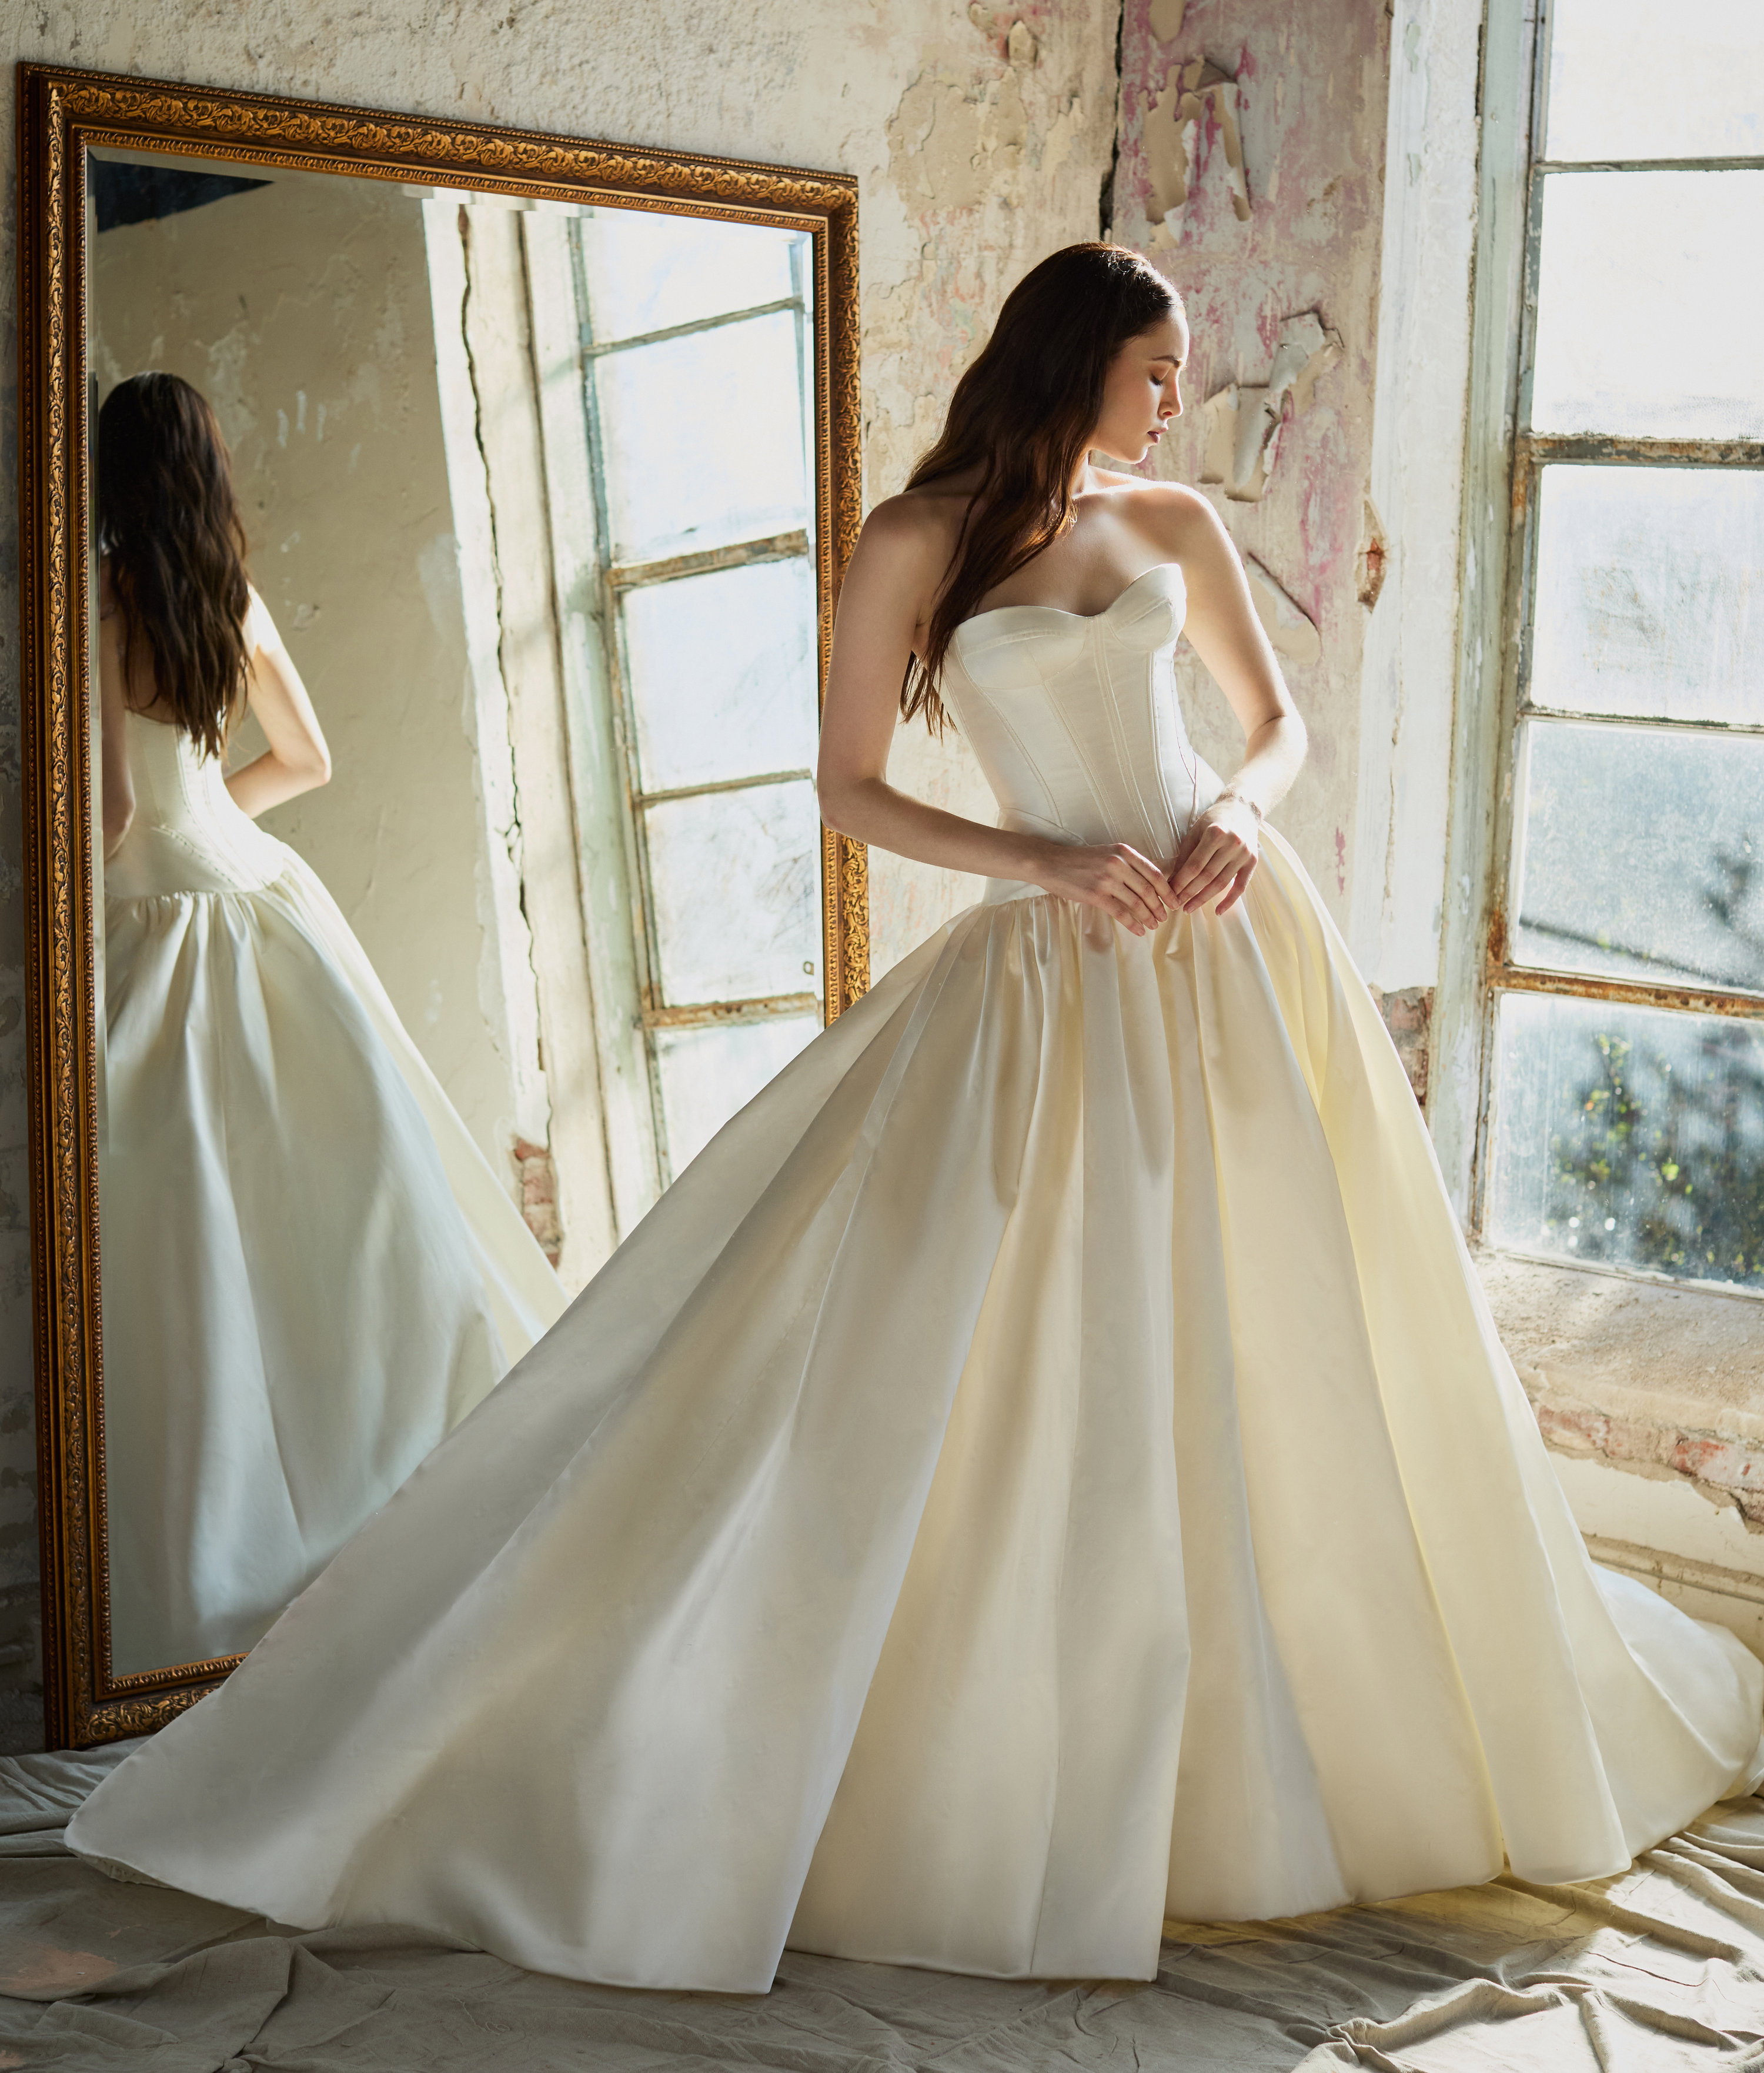 Strapless bridal ball gown.